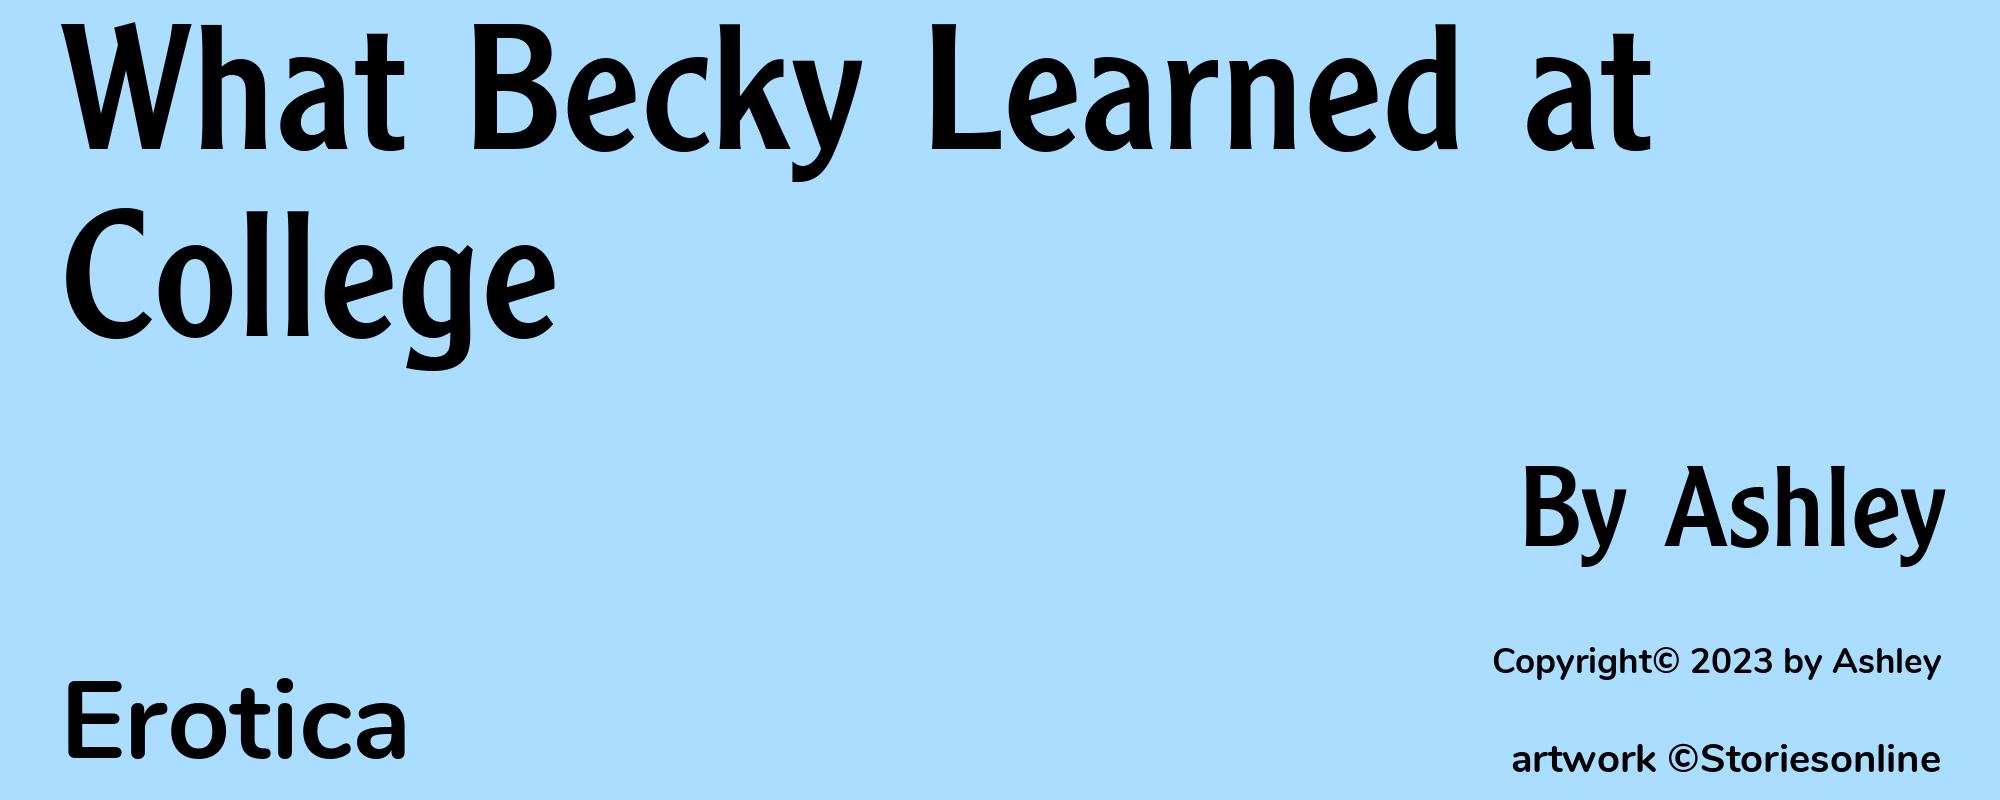 What Becky Learned at College - Cover